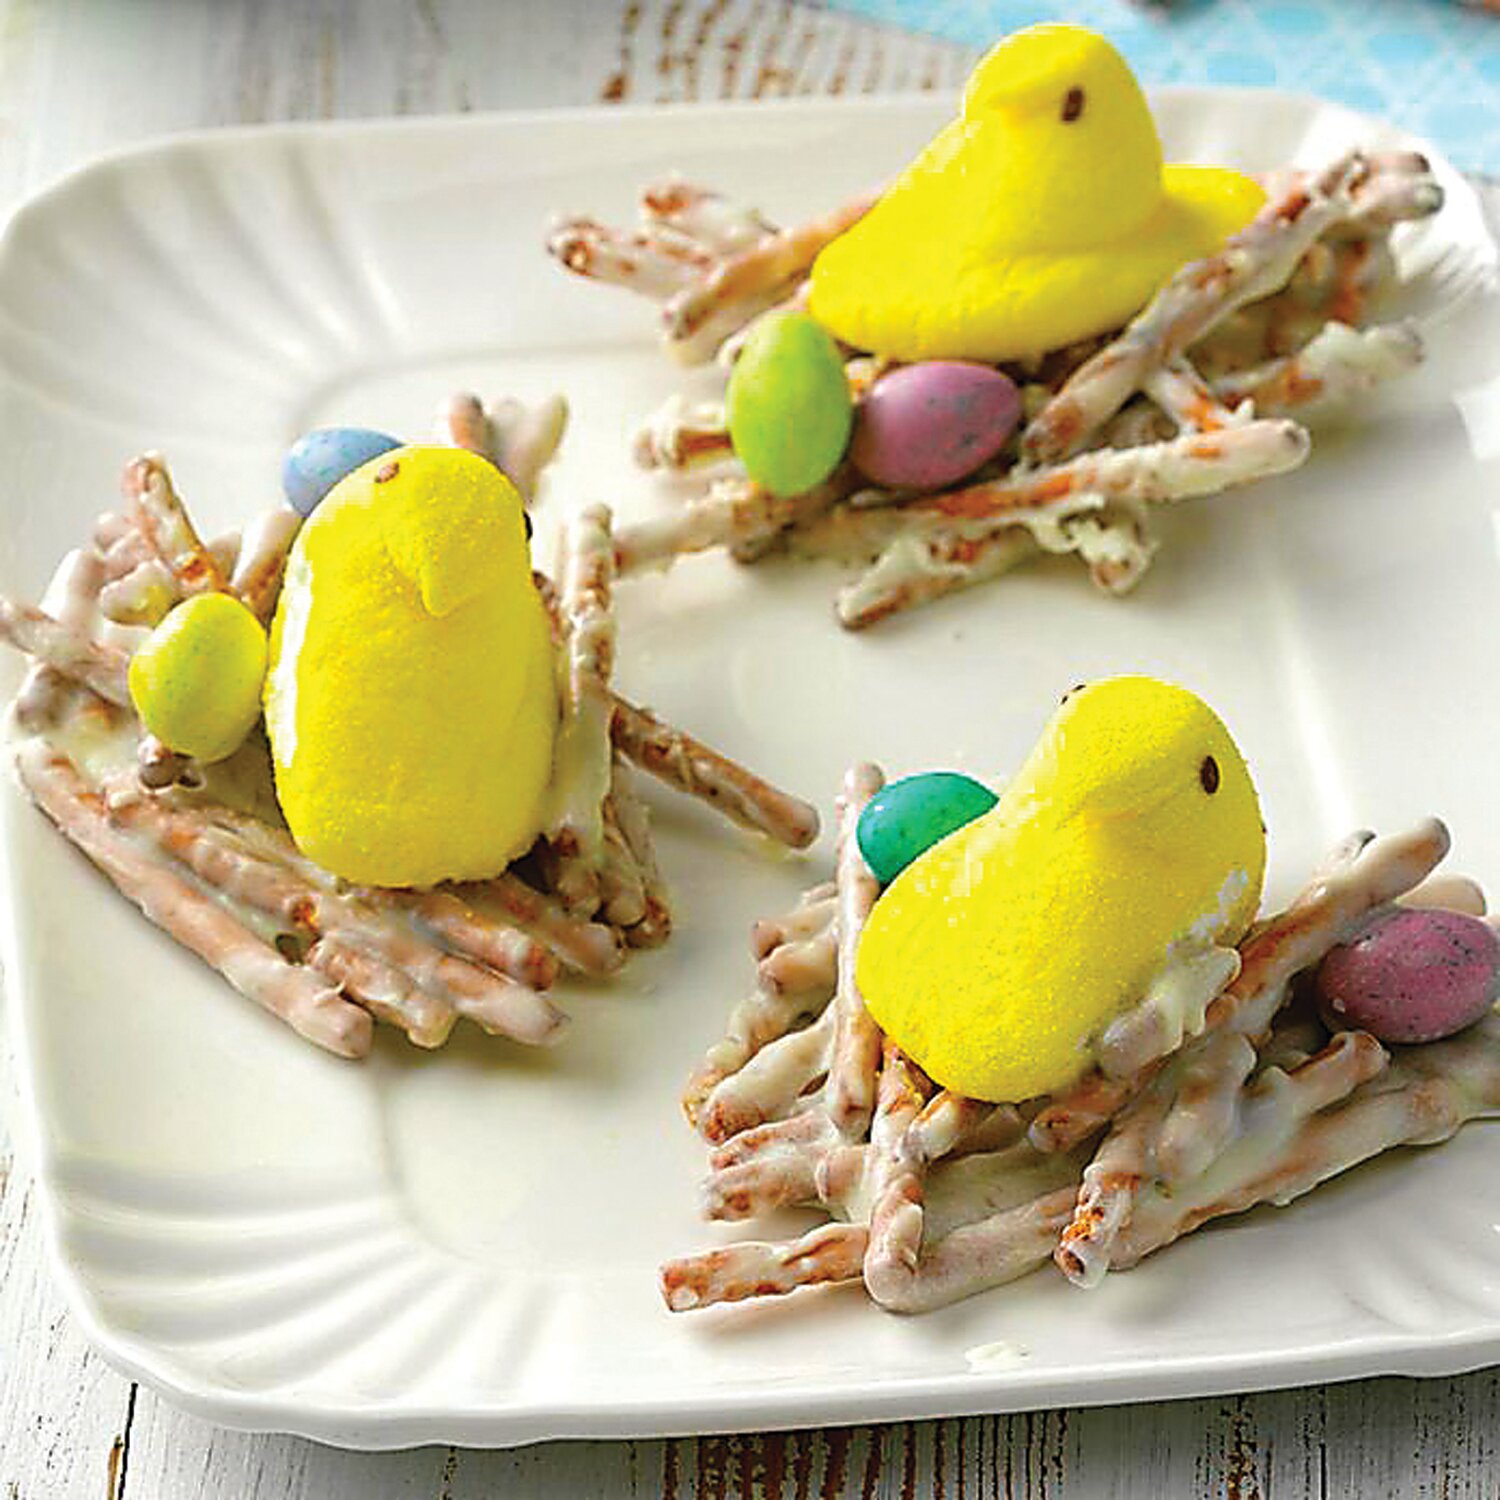 Pretzels and Just Born marshmallow Peeps are materials for colorful Easter treats.